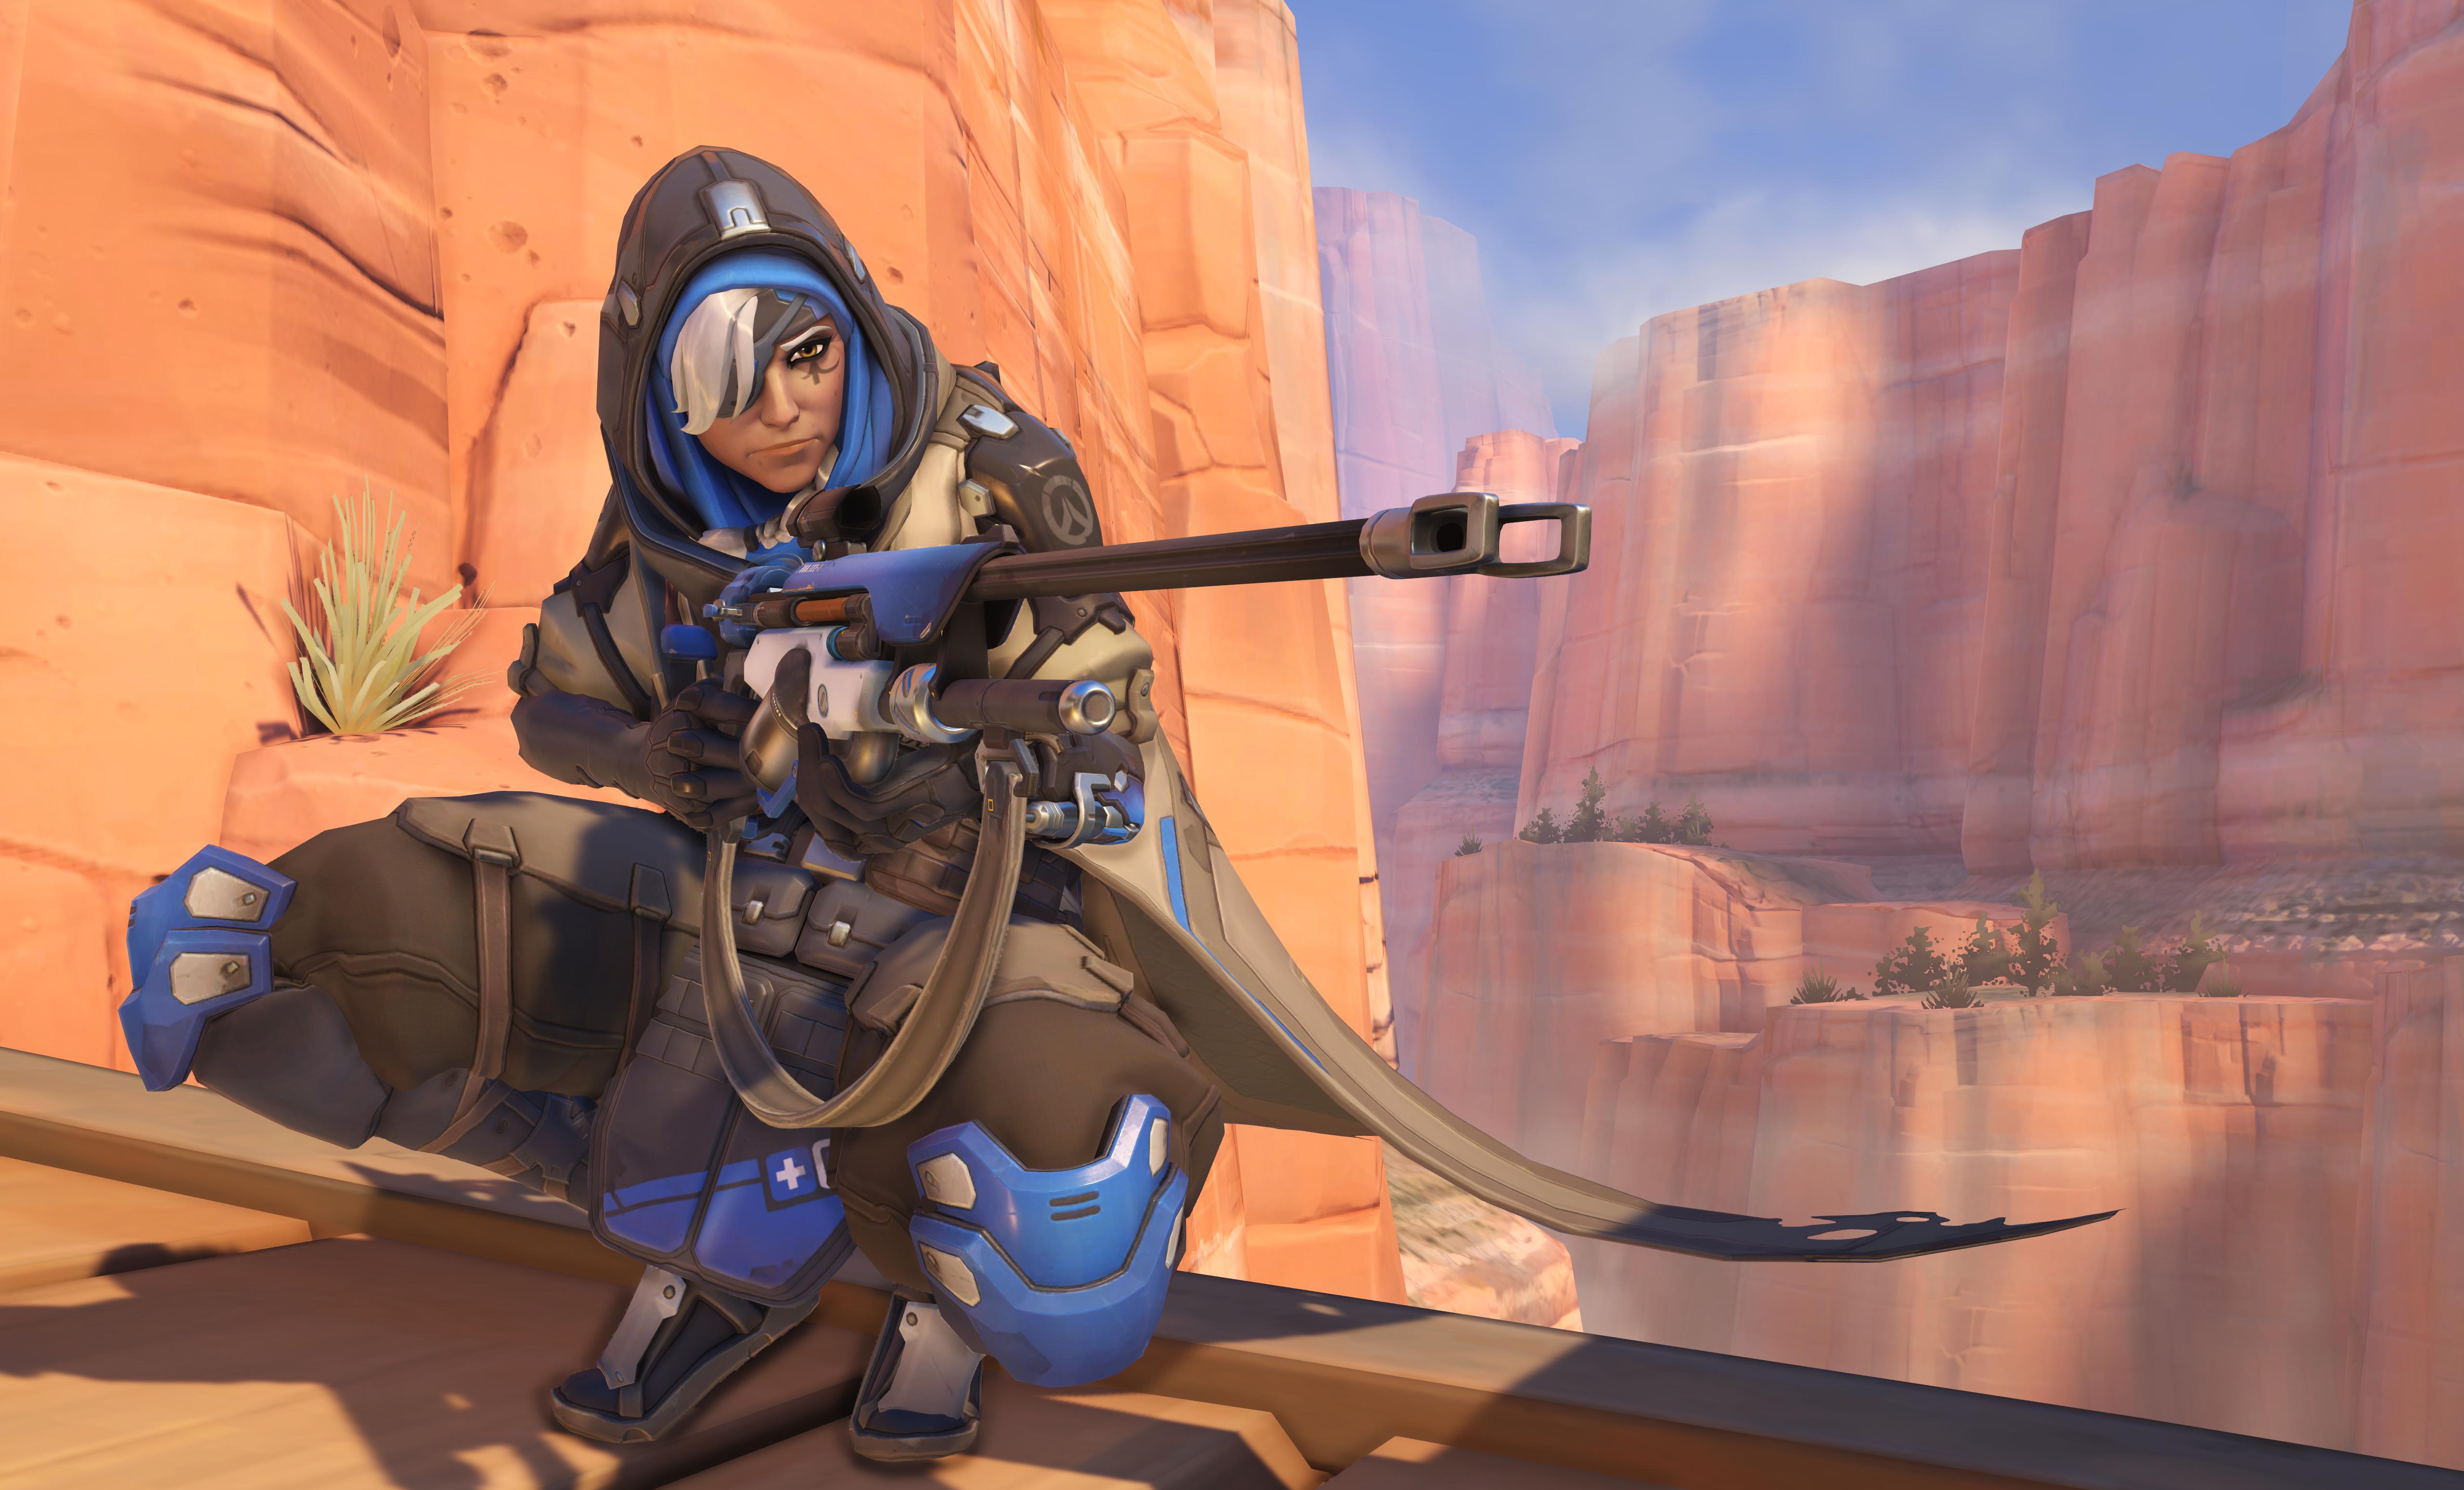 Ana Overwatch Character Hd Games 4k Wallpapers Images Backgrounds Photos And Pictures